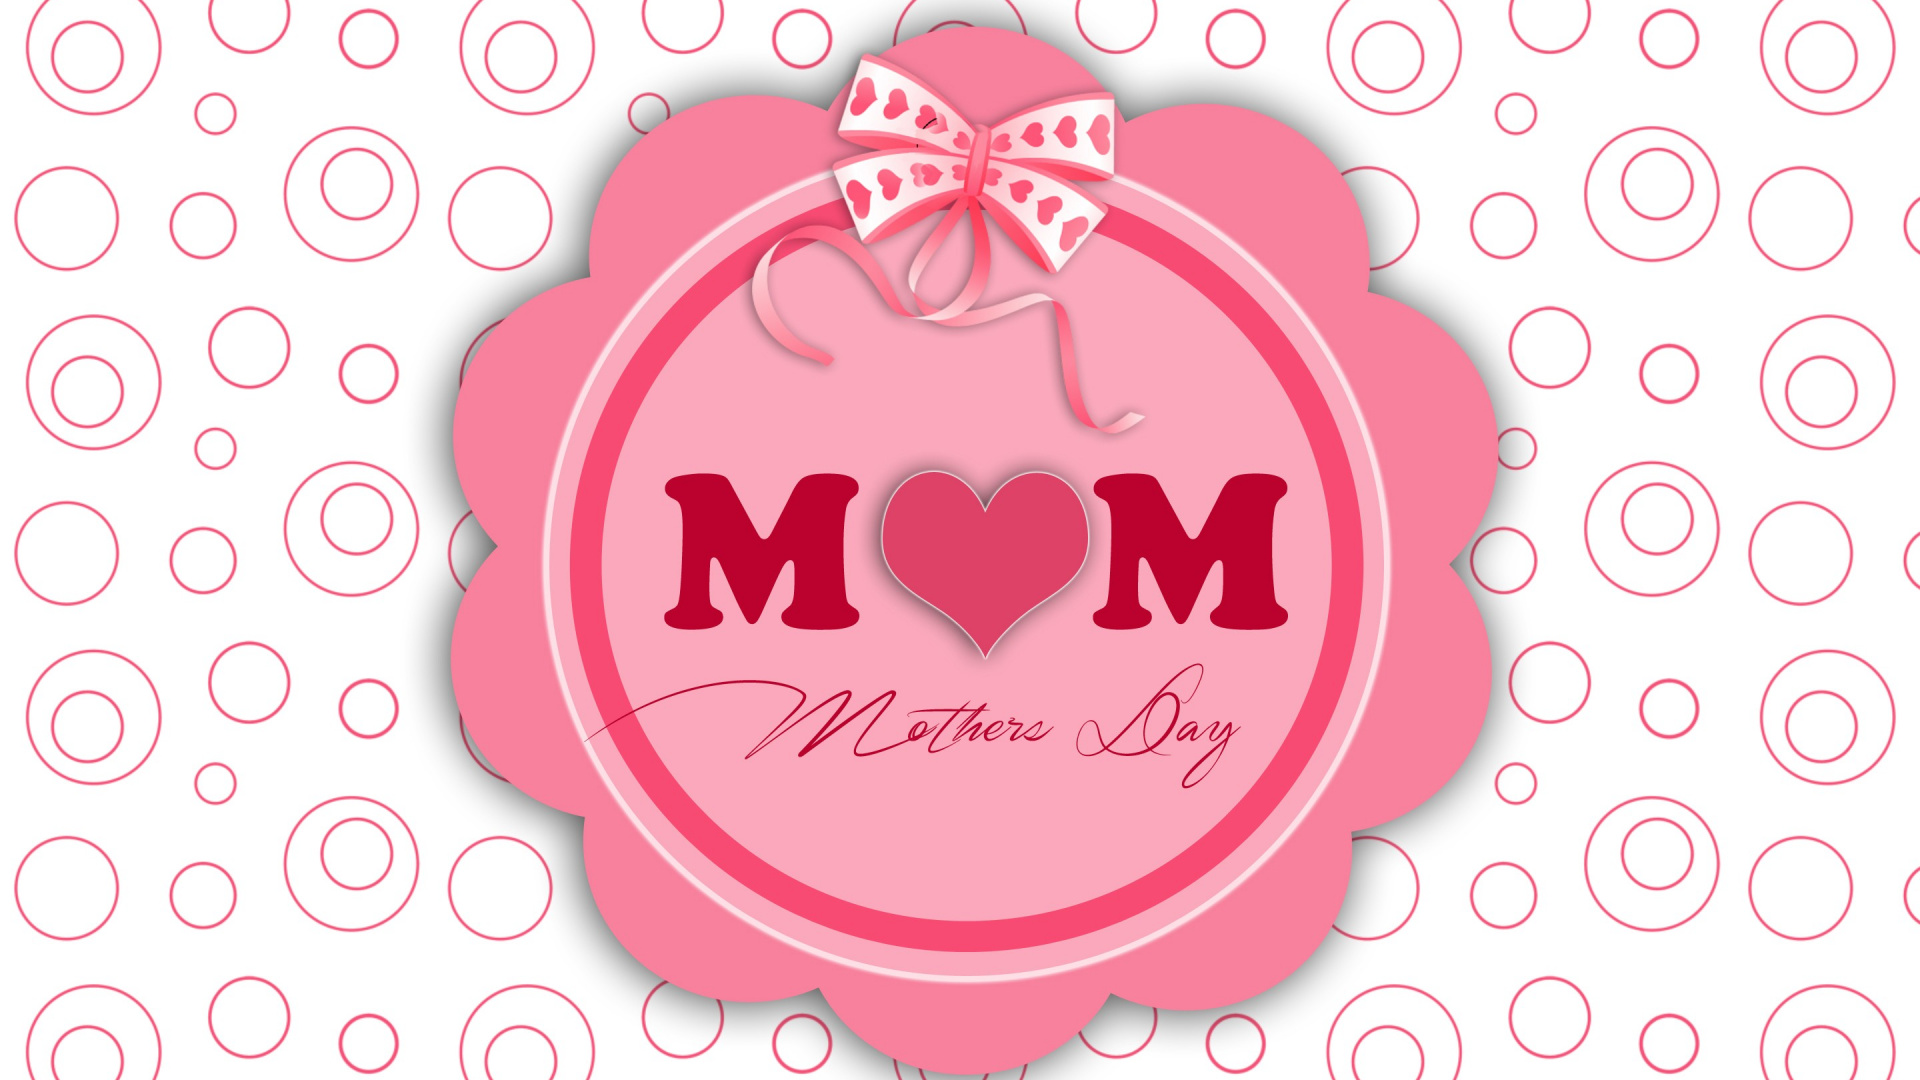 Mothers Day, Pink, Text, Heart, Clip Art. Wallpaper in 1920x1080 Resolution